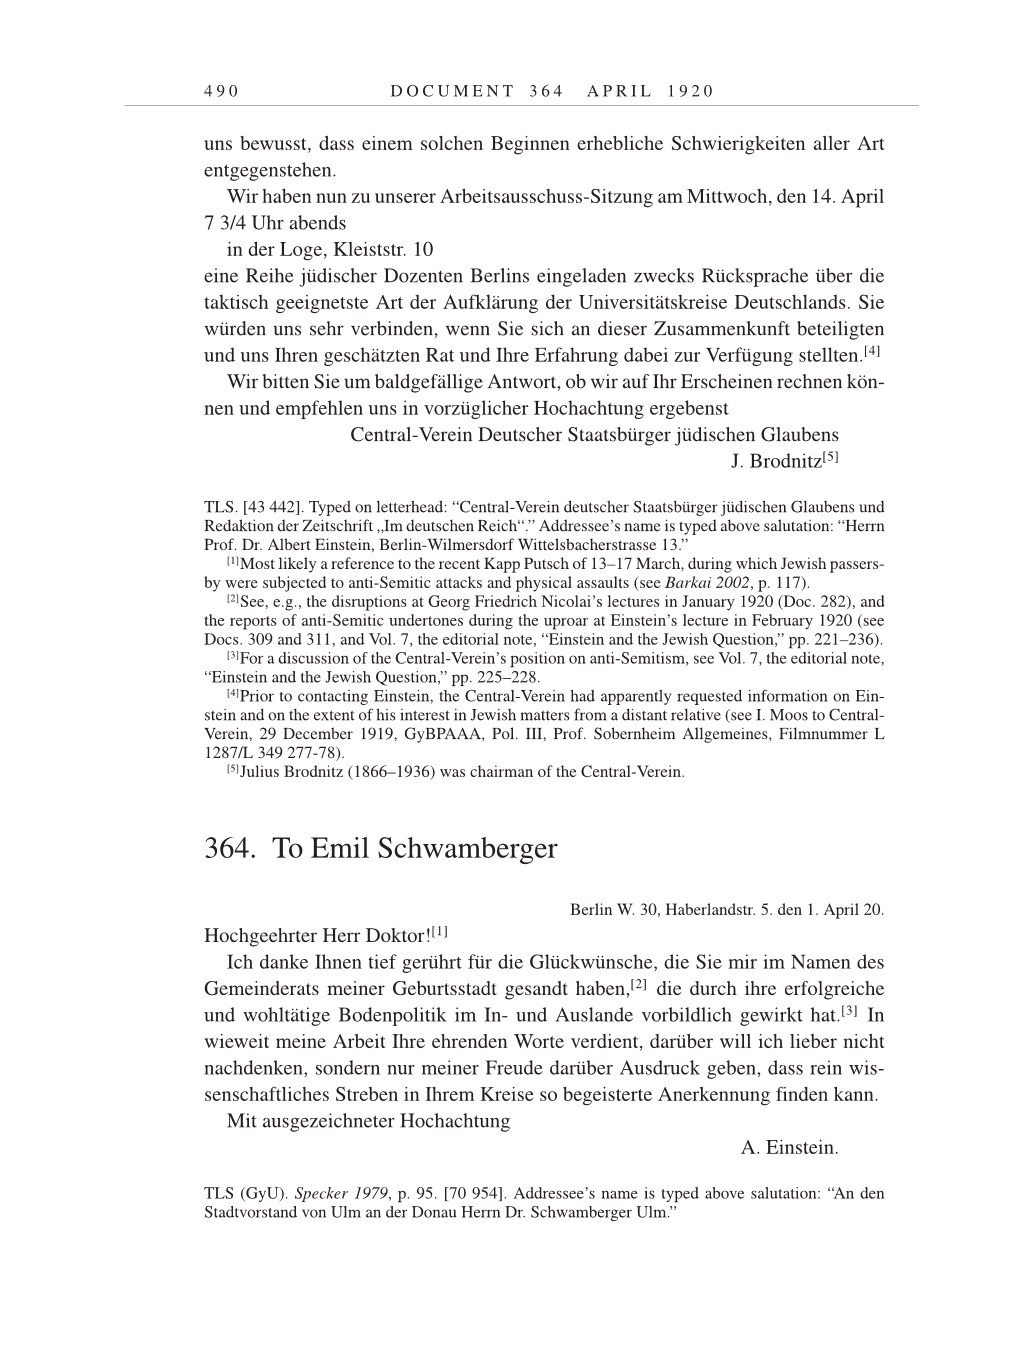 Volume 9: The Berlin Years: Correspondence January 1919-April 1920 page 490